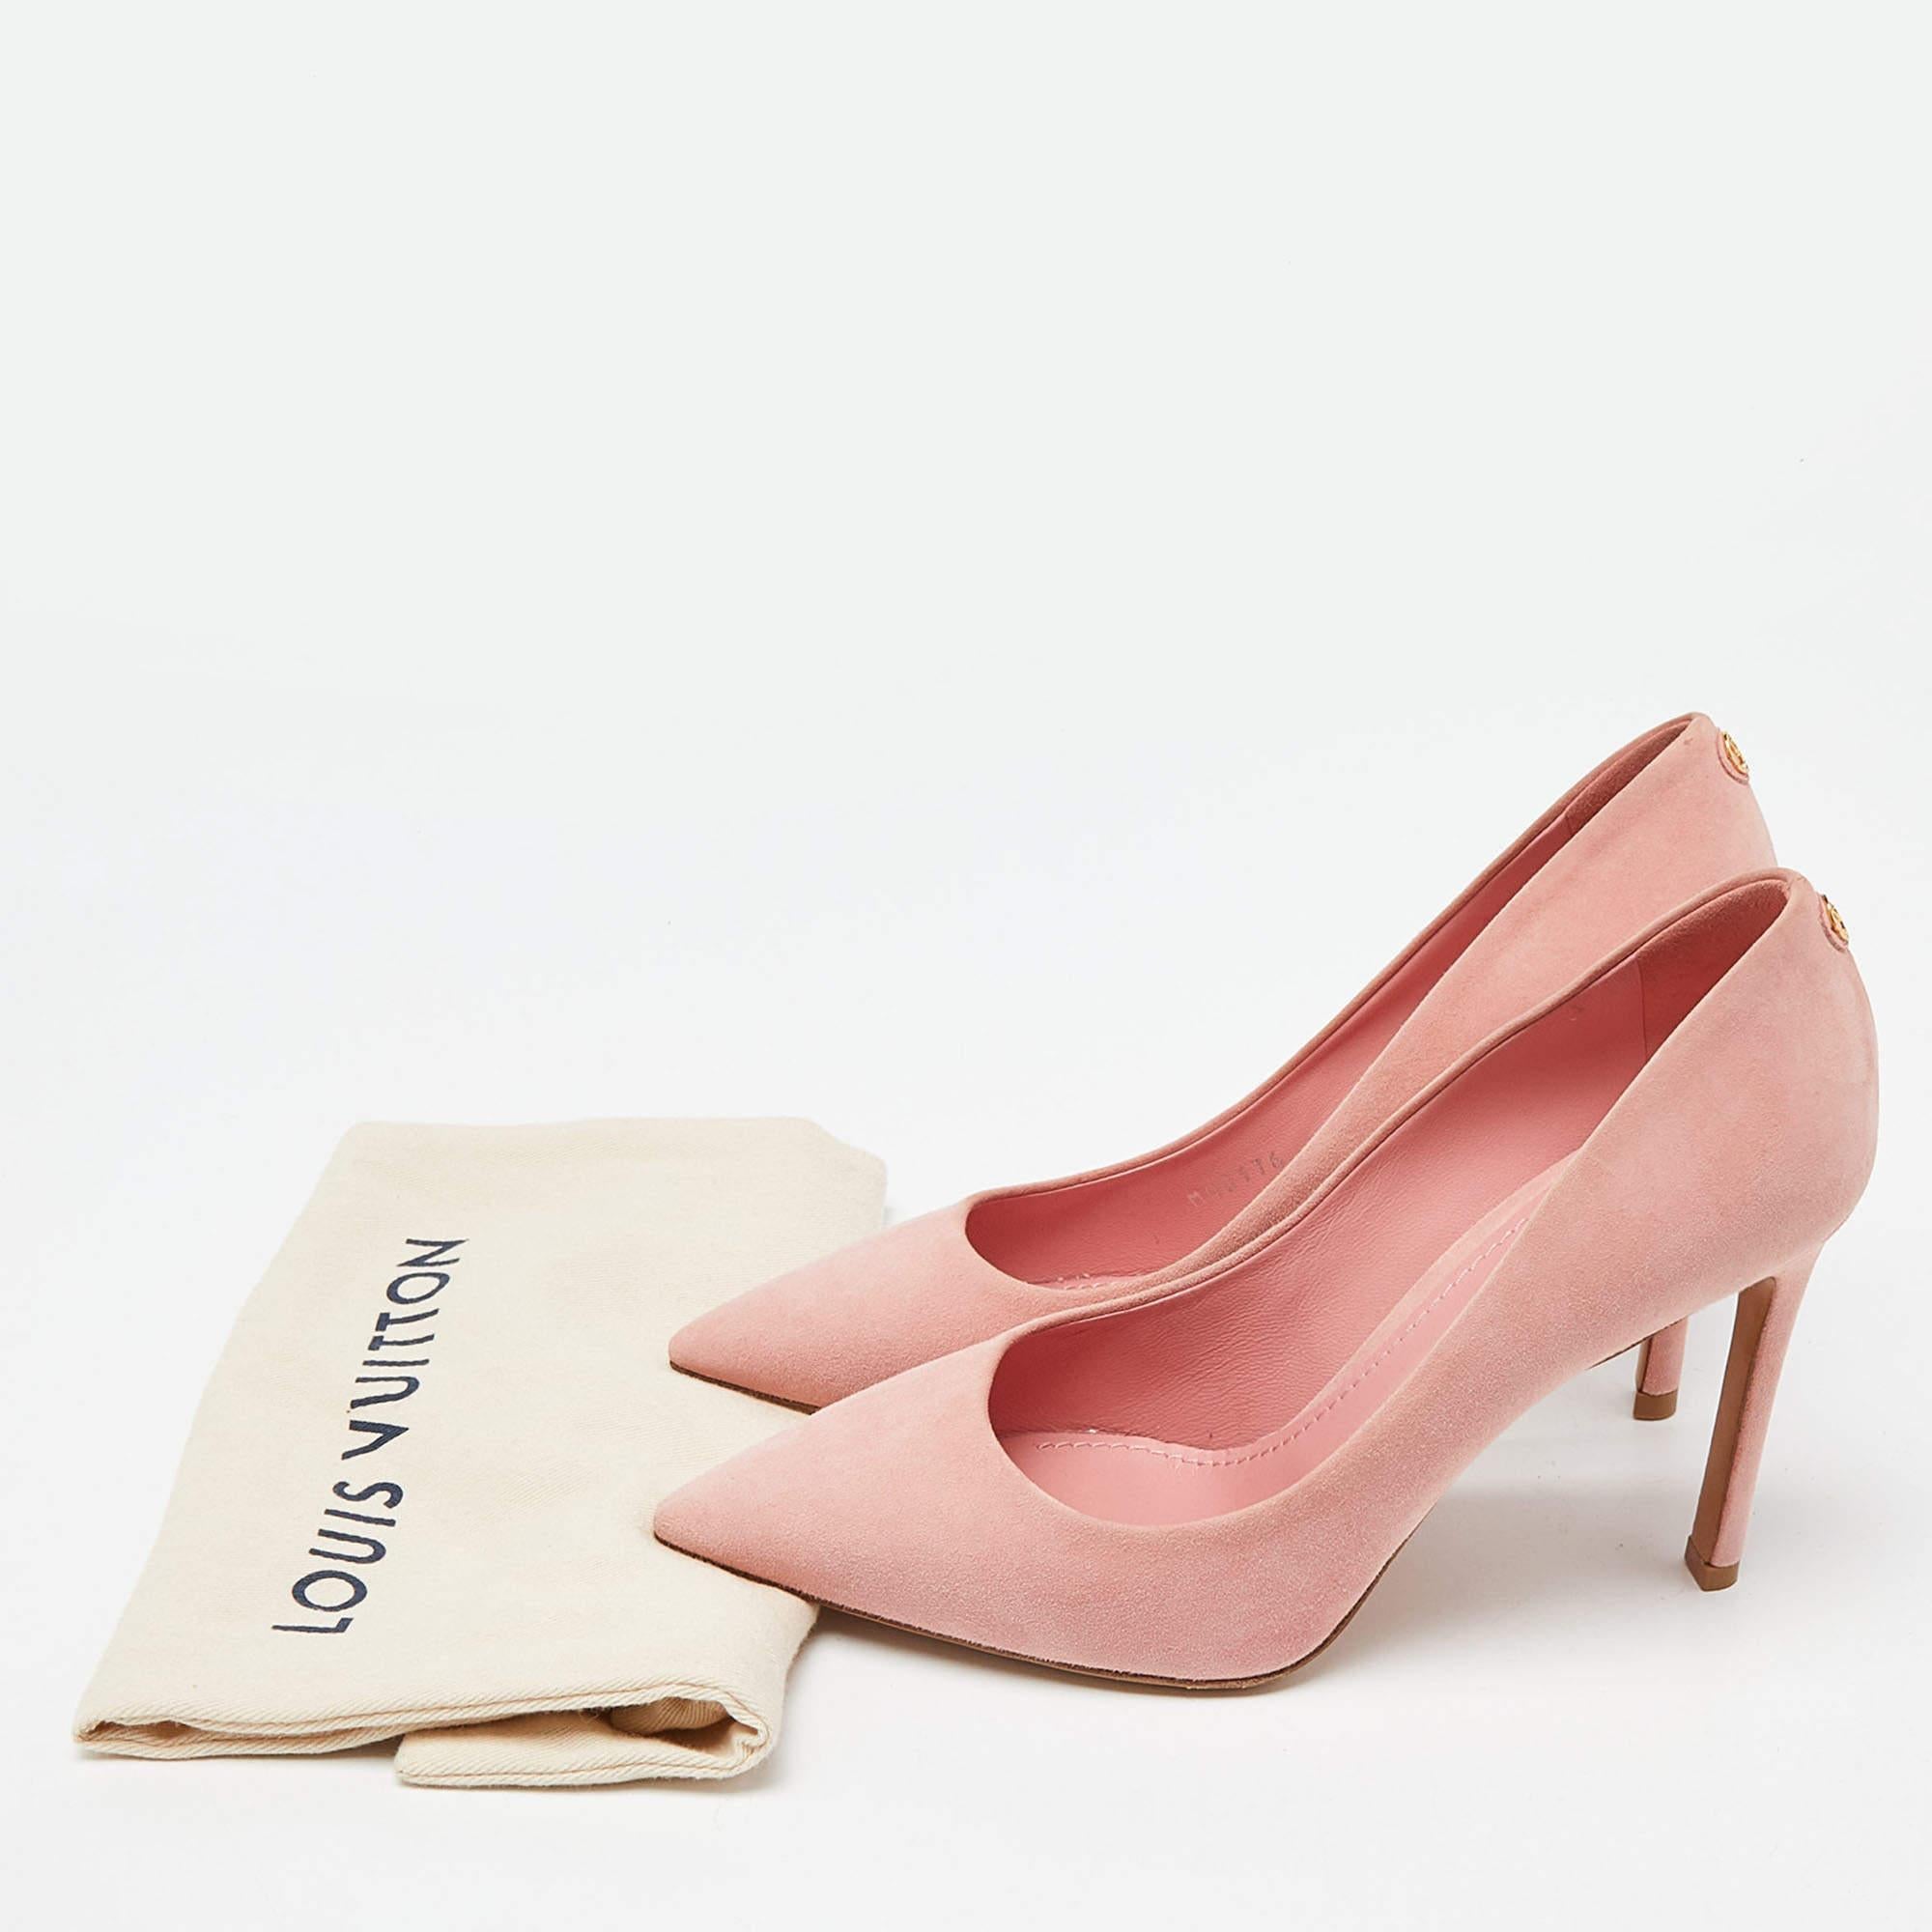 Louis Vuitton Pink Suede Pointed Toe Pumps Size 38.5 For Sale 2